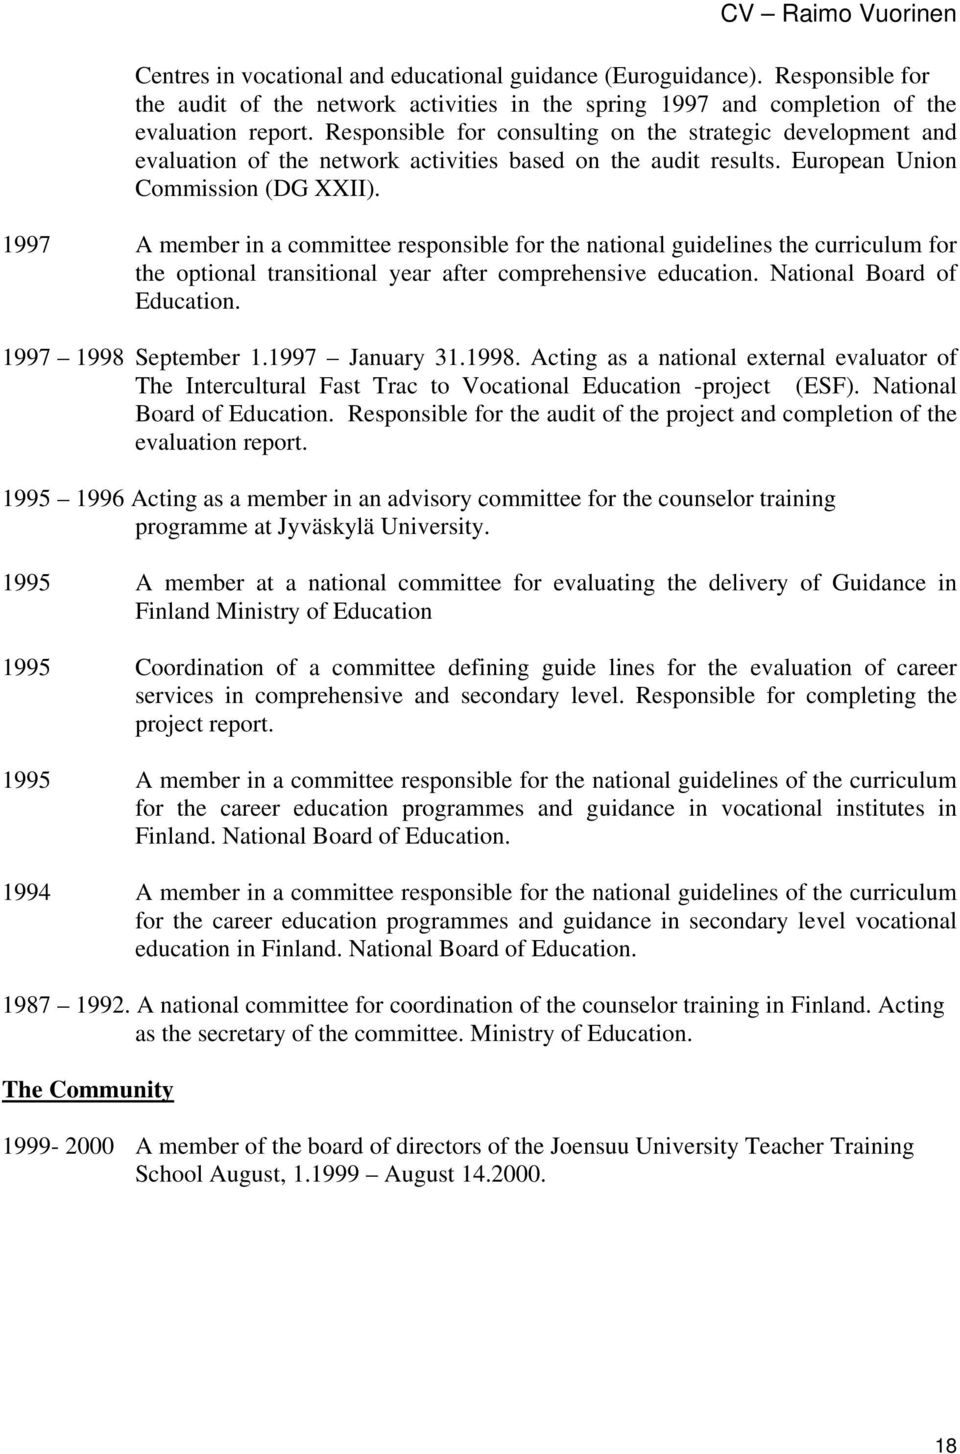 1997 A member in a committee responsible for the national guidelines the curriculum for the optional transitional year after comprehensive education. National Board of Education.